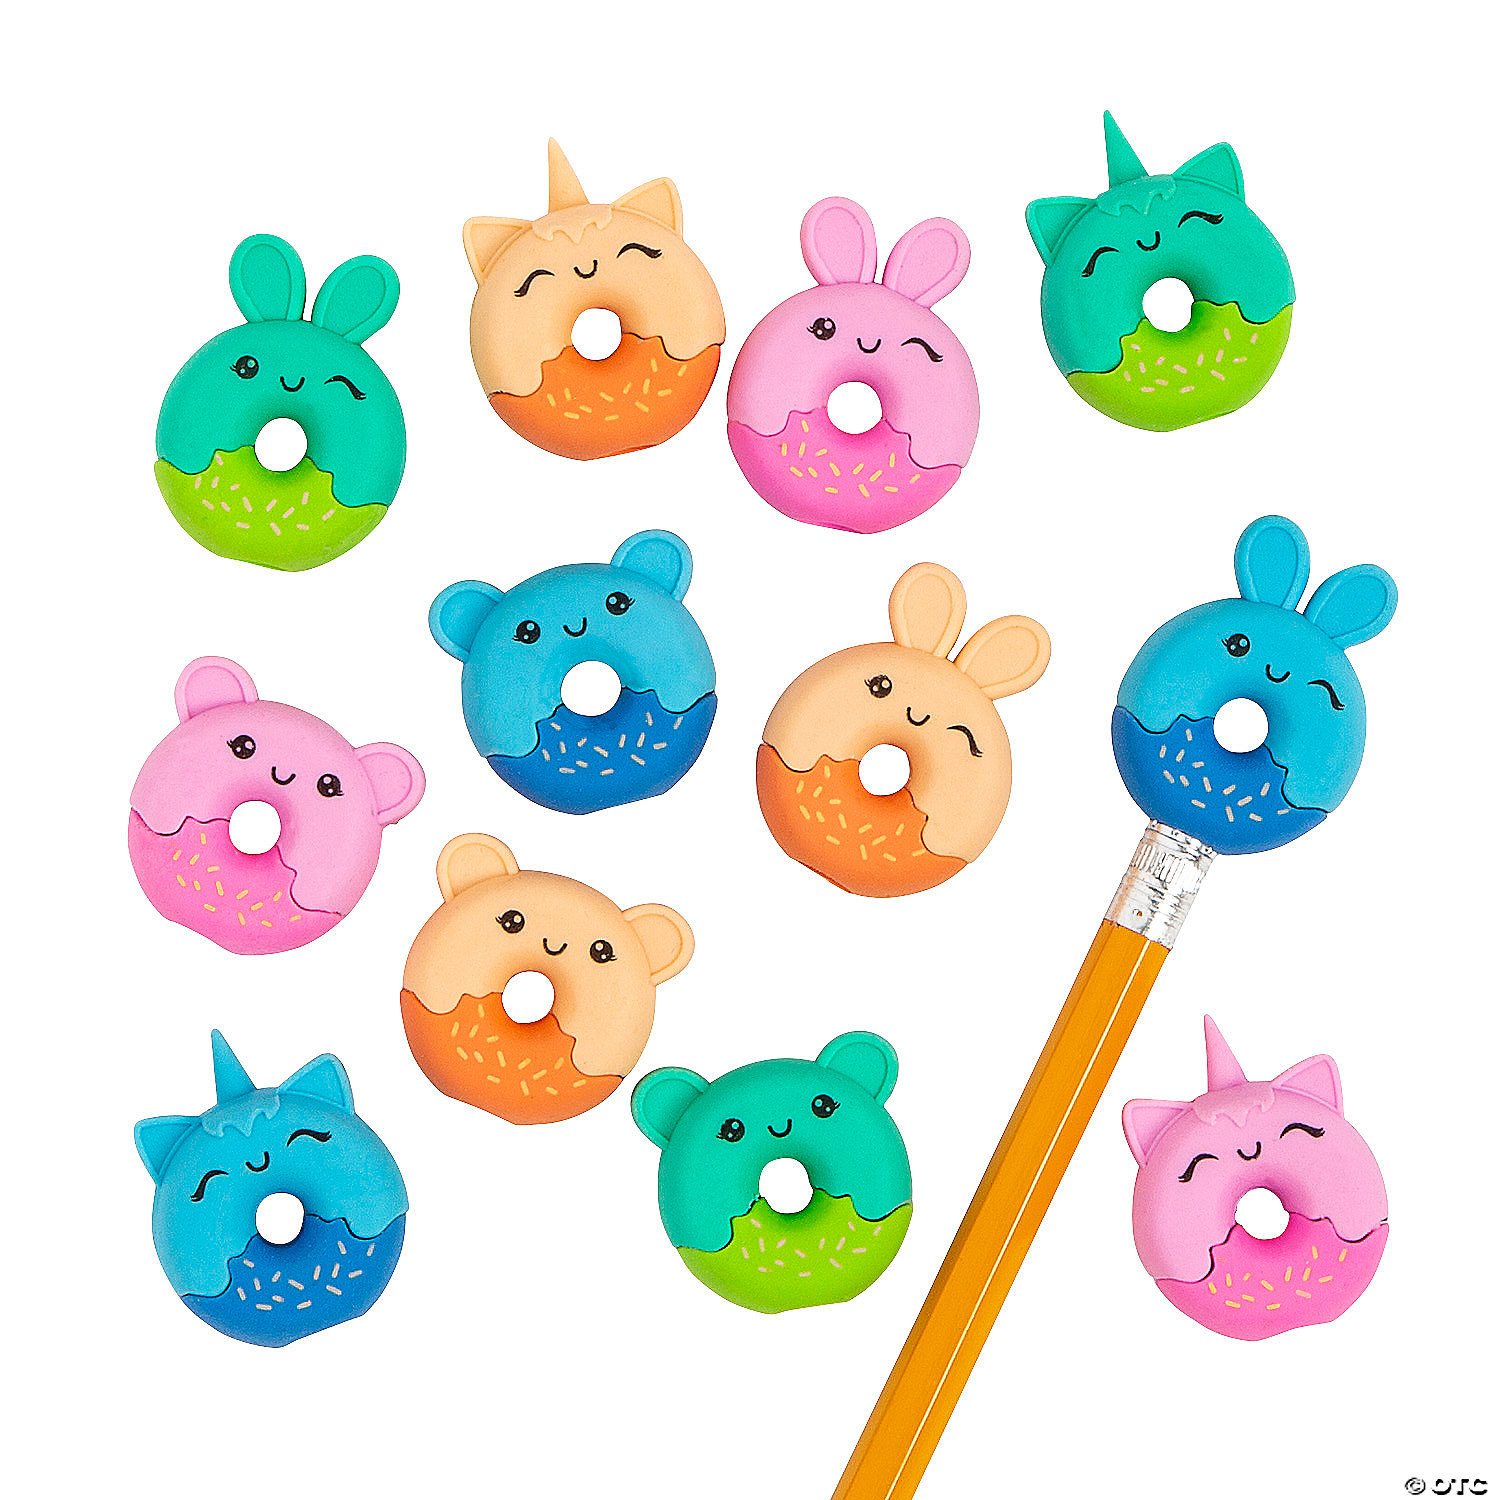  Fun Express Happy Birthday Pencils - Bulk set of 24 for  Teachers and Students - Classroom Supplies, Rewards, Handouts and Party  Favors : Toys & Games